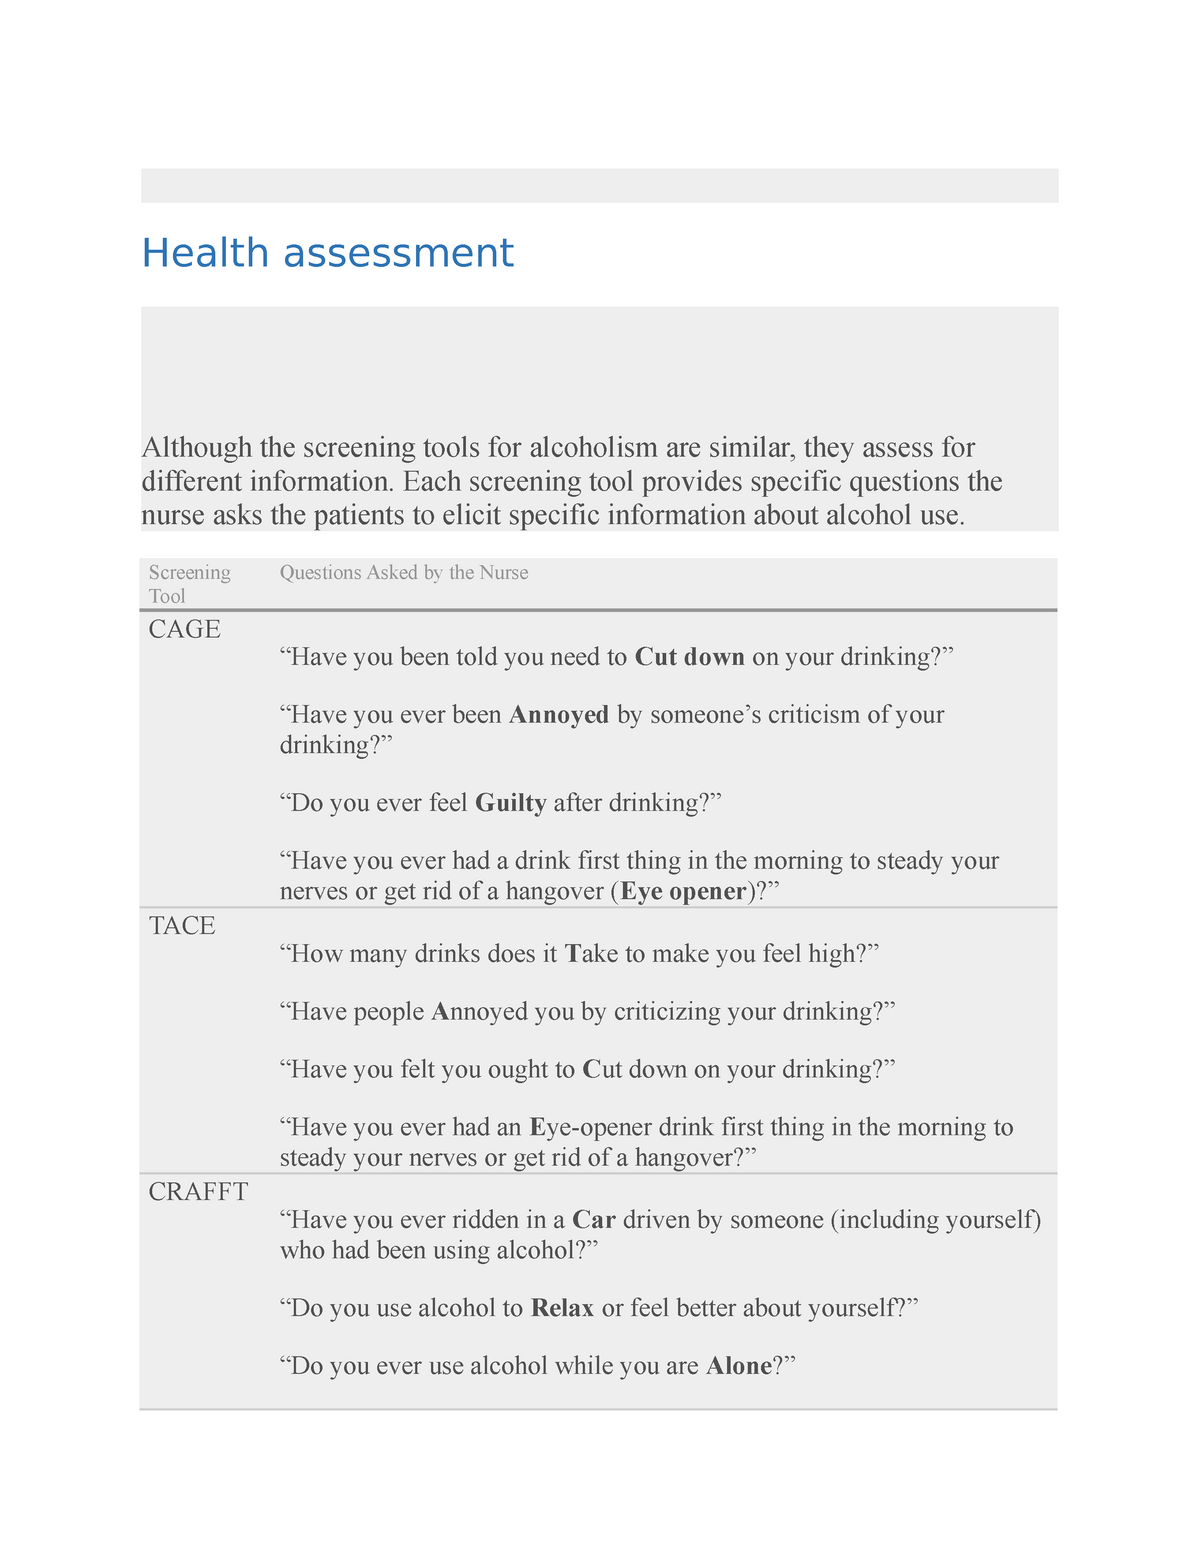 Health assessment - nmeonicsa - Health assessment Although the ...